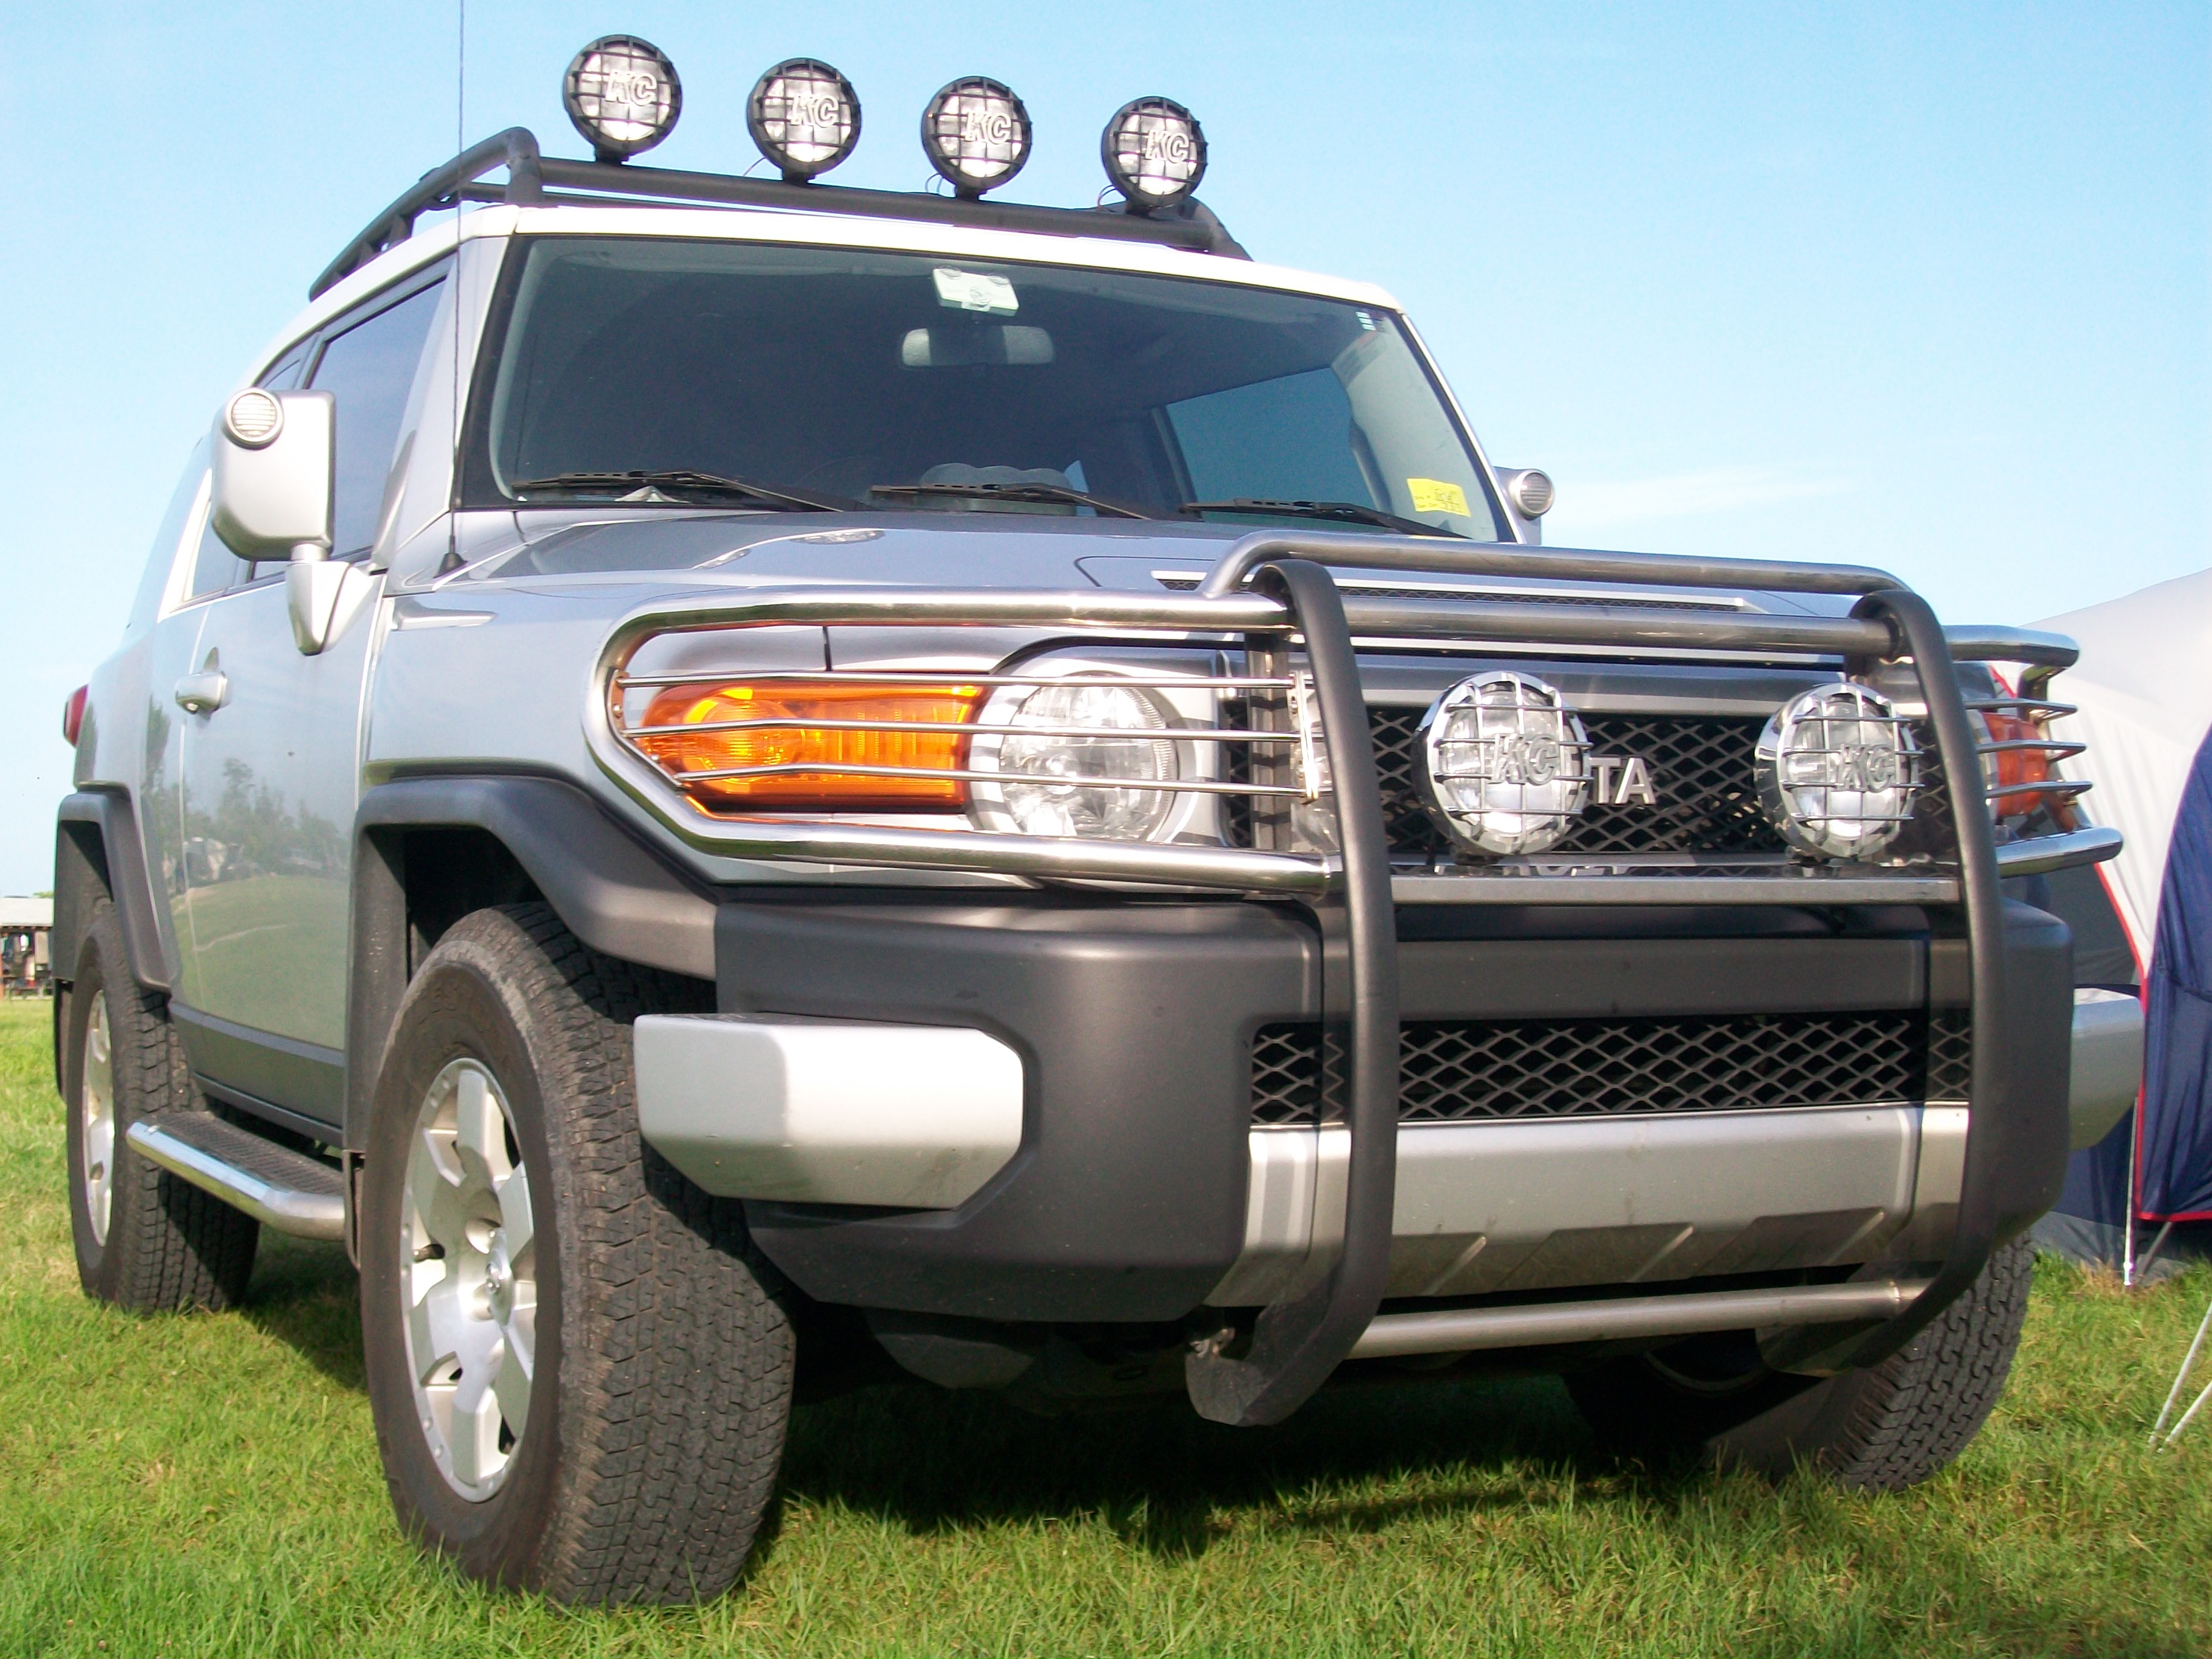 Romik Running boards are here to stay